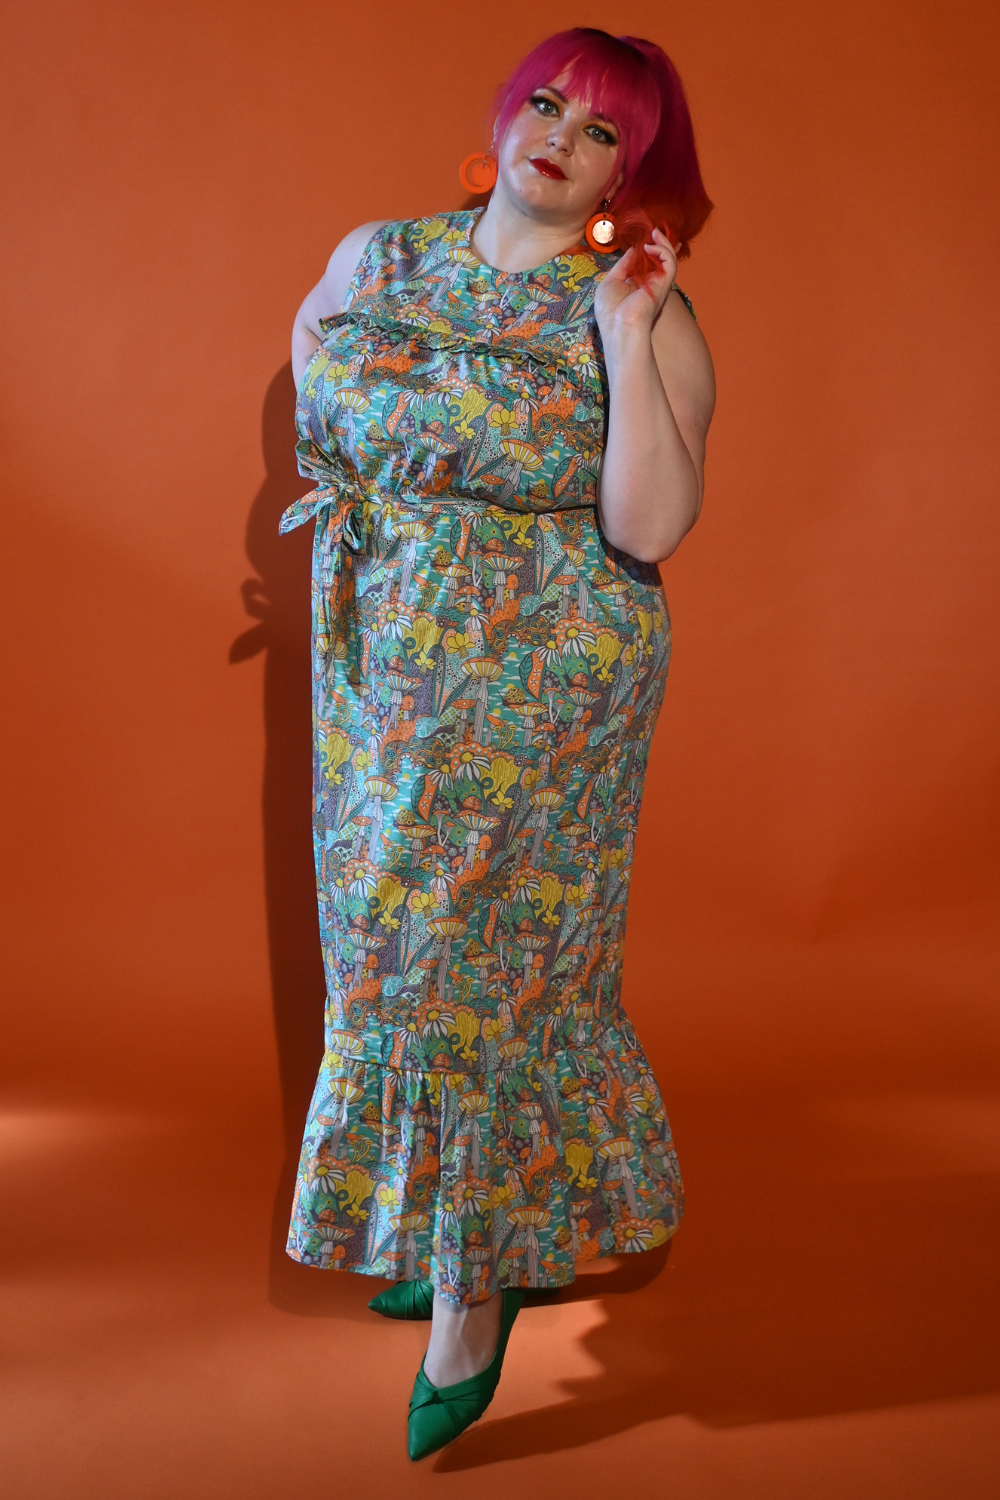 Gorgeous pink-haired model in mushroom print maxi dress in teal, yellow and orange